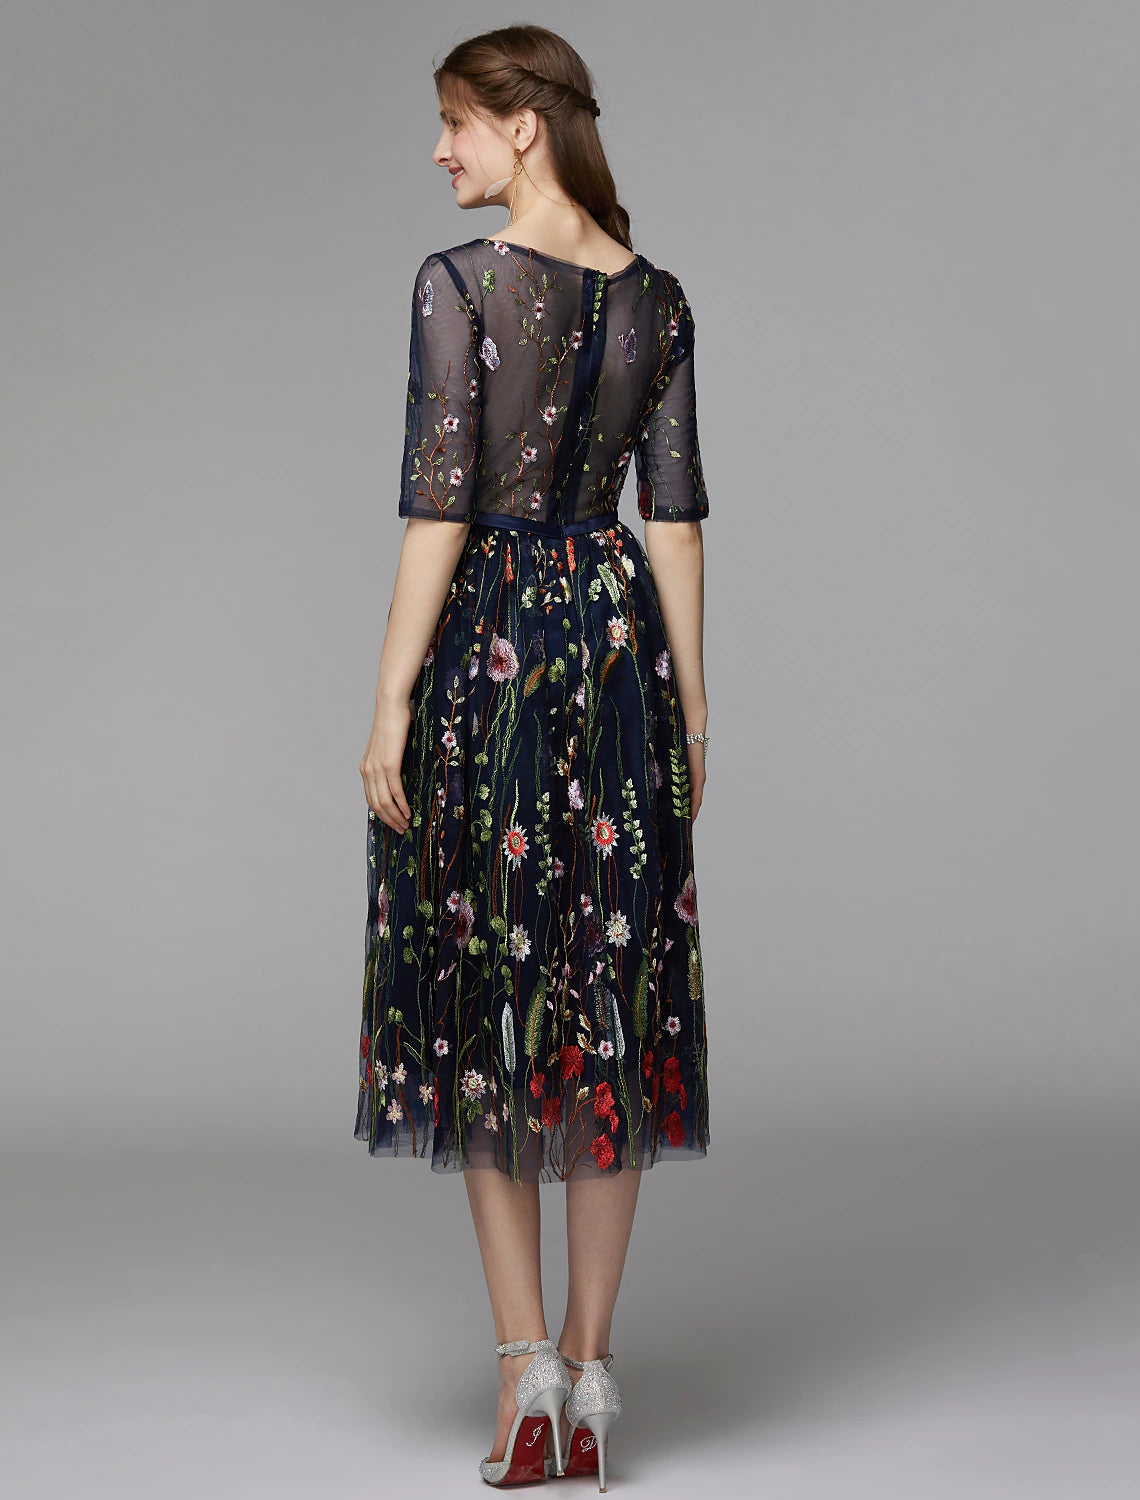 A-Line Party Dress Holiday Tea Length Half Sleeve Illusion Neck Organza with Embroidery Appliques